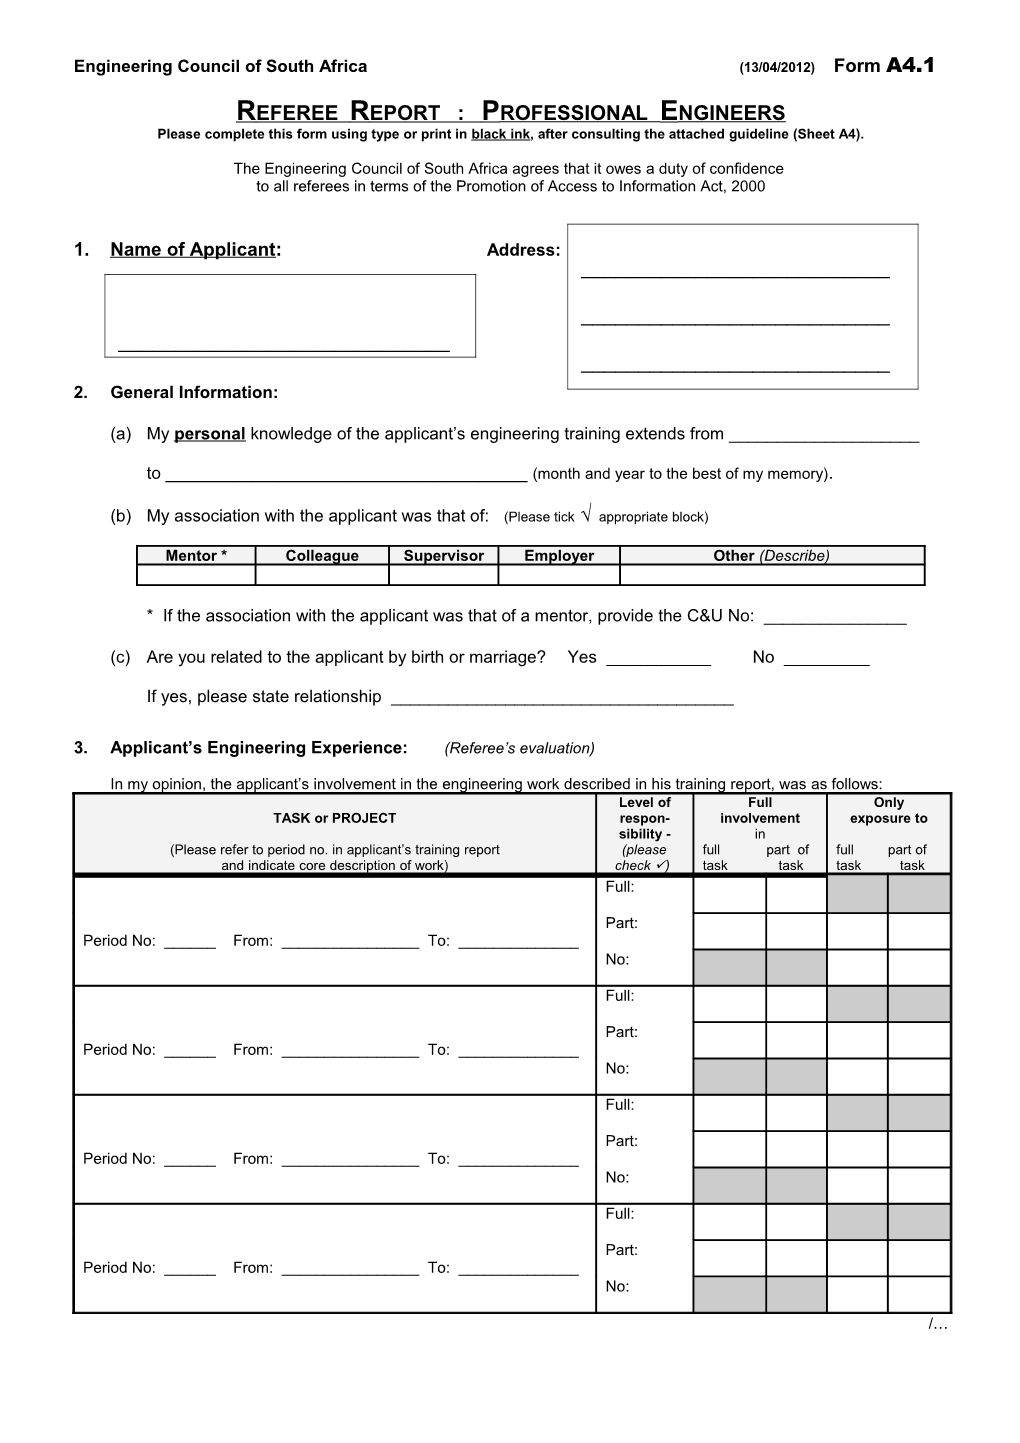 Engineering Council of South Africa(13/04/2012) Form A4.1